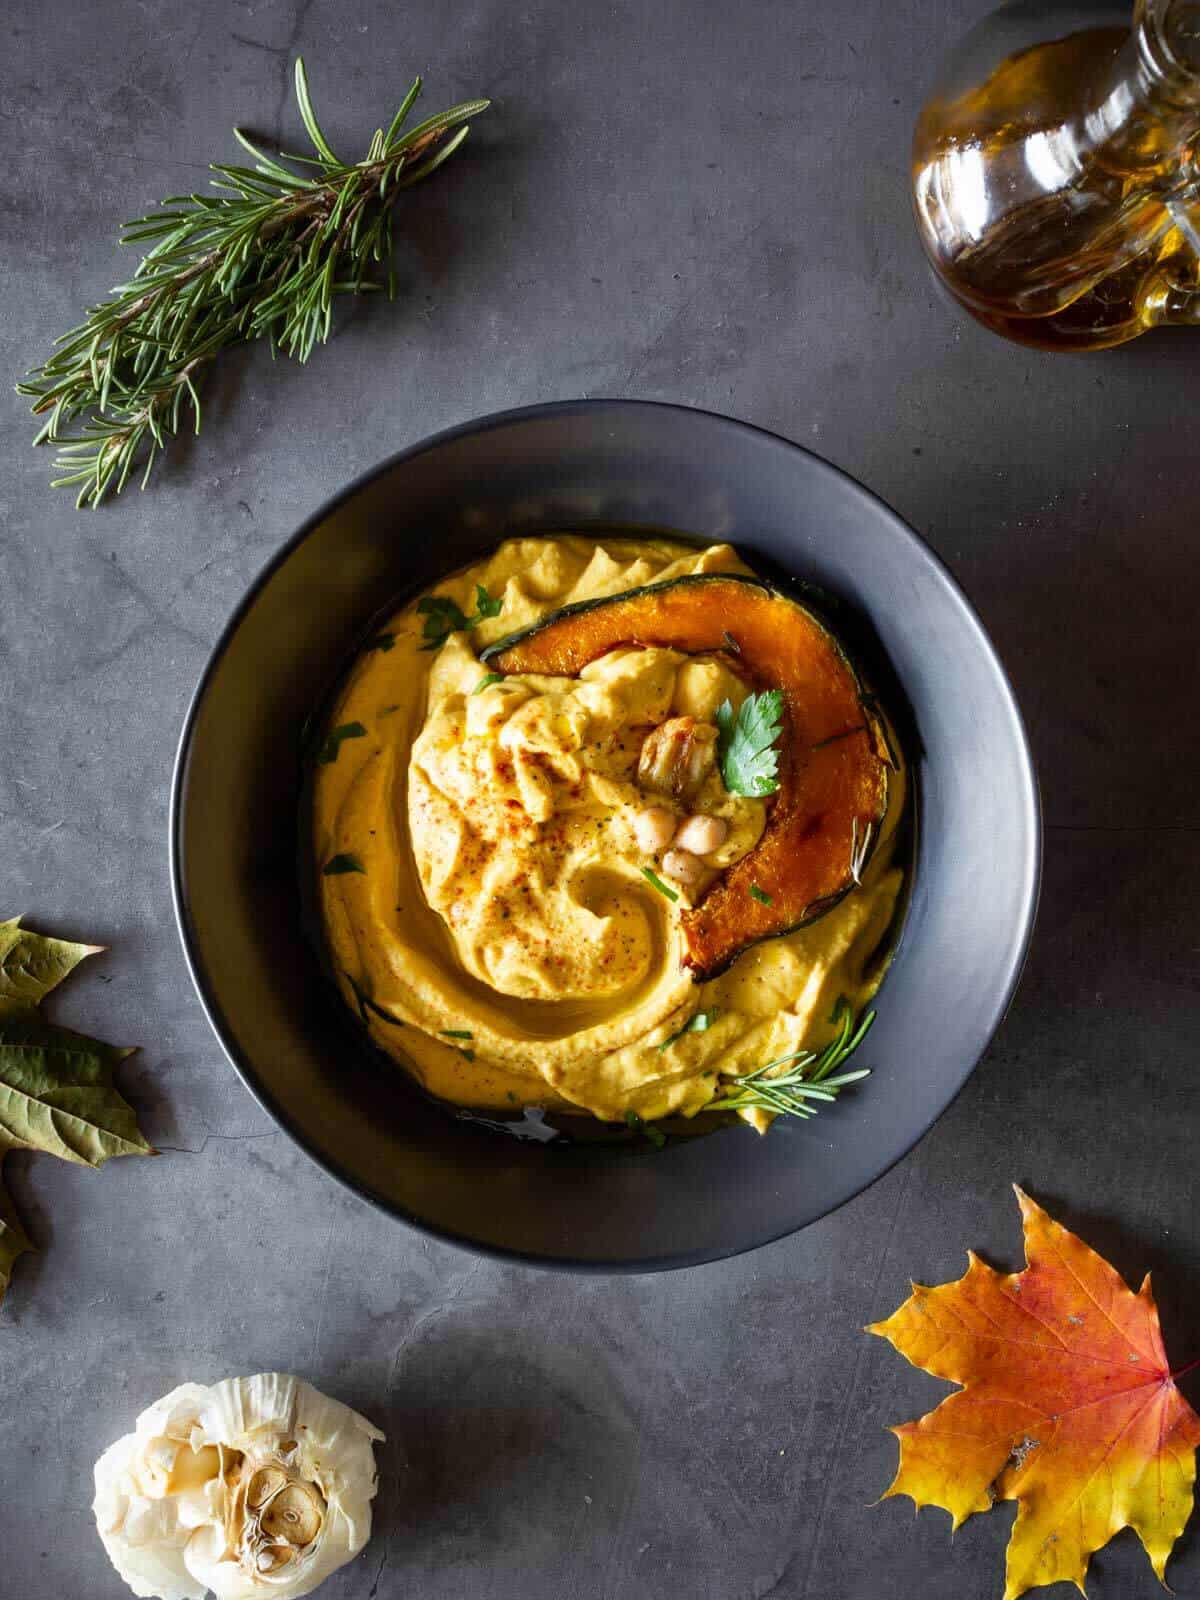 plated pumpkin hummus with a slice of roasted pumpkin on top as garnishing.